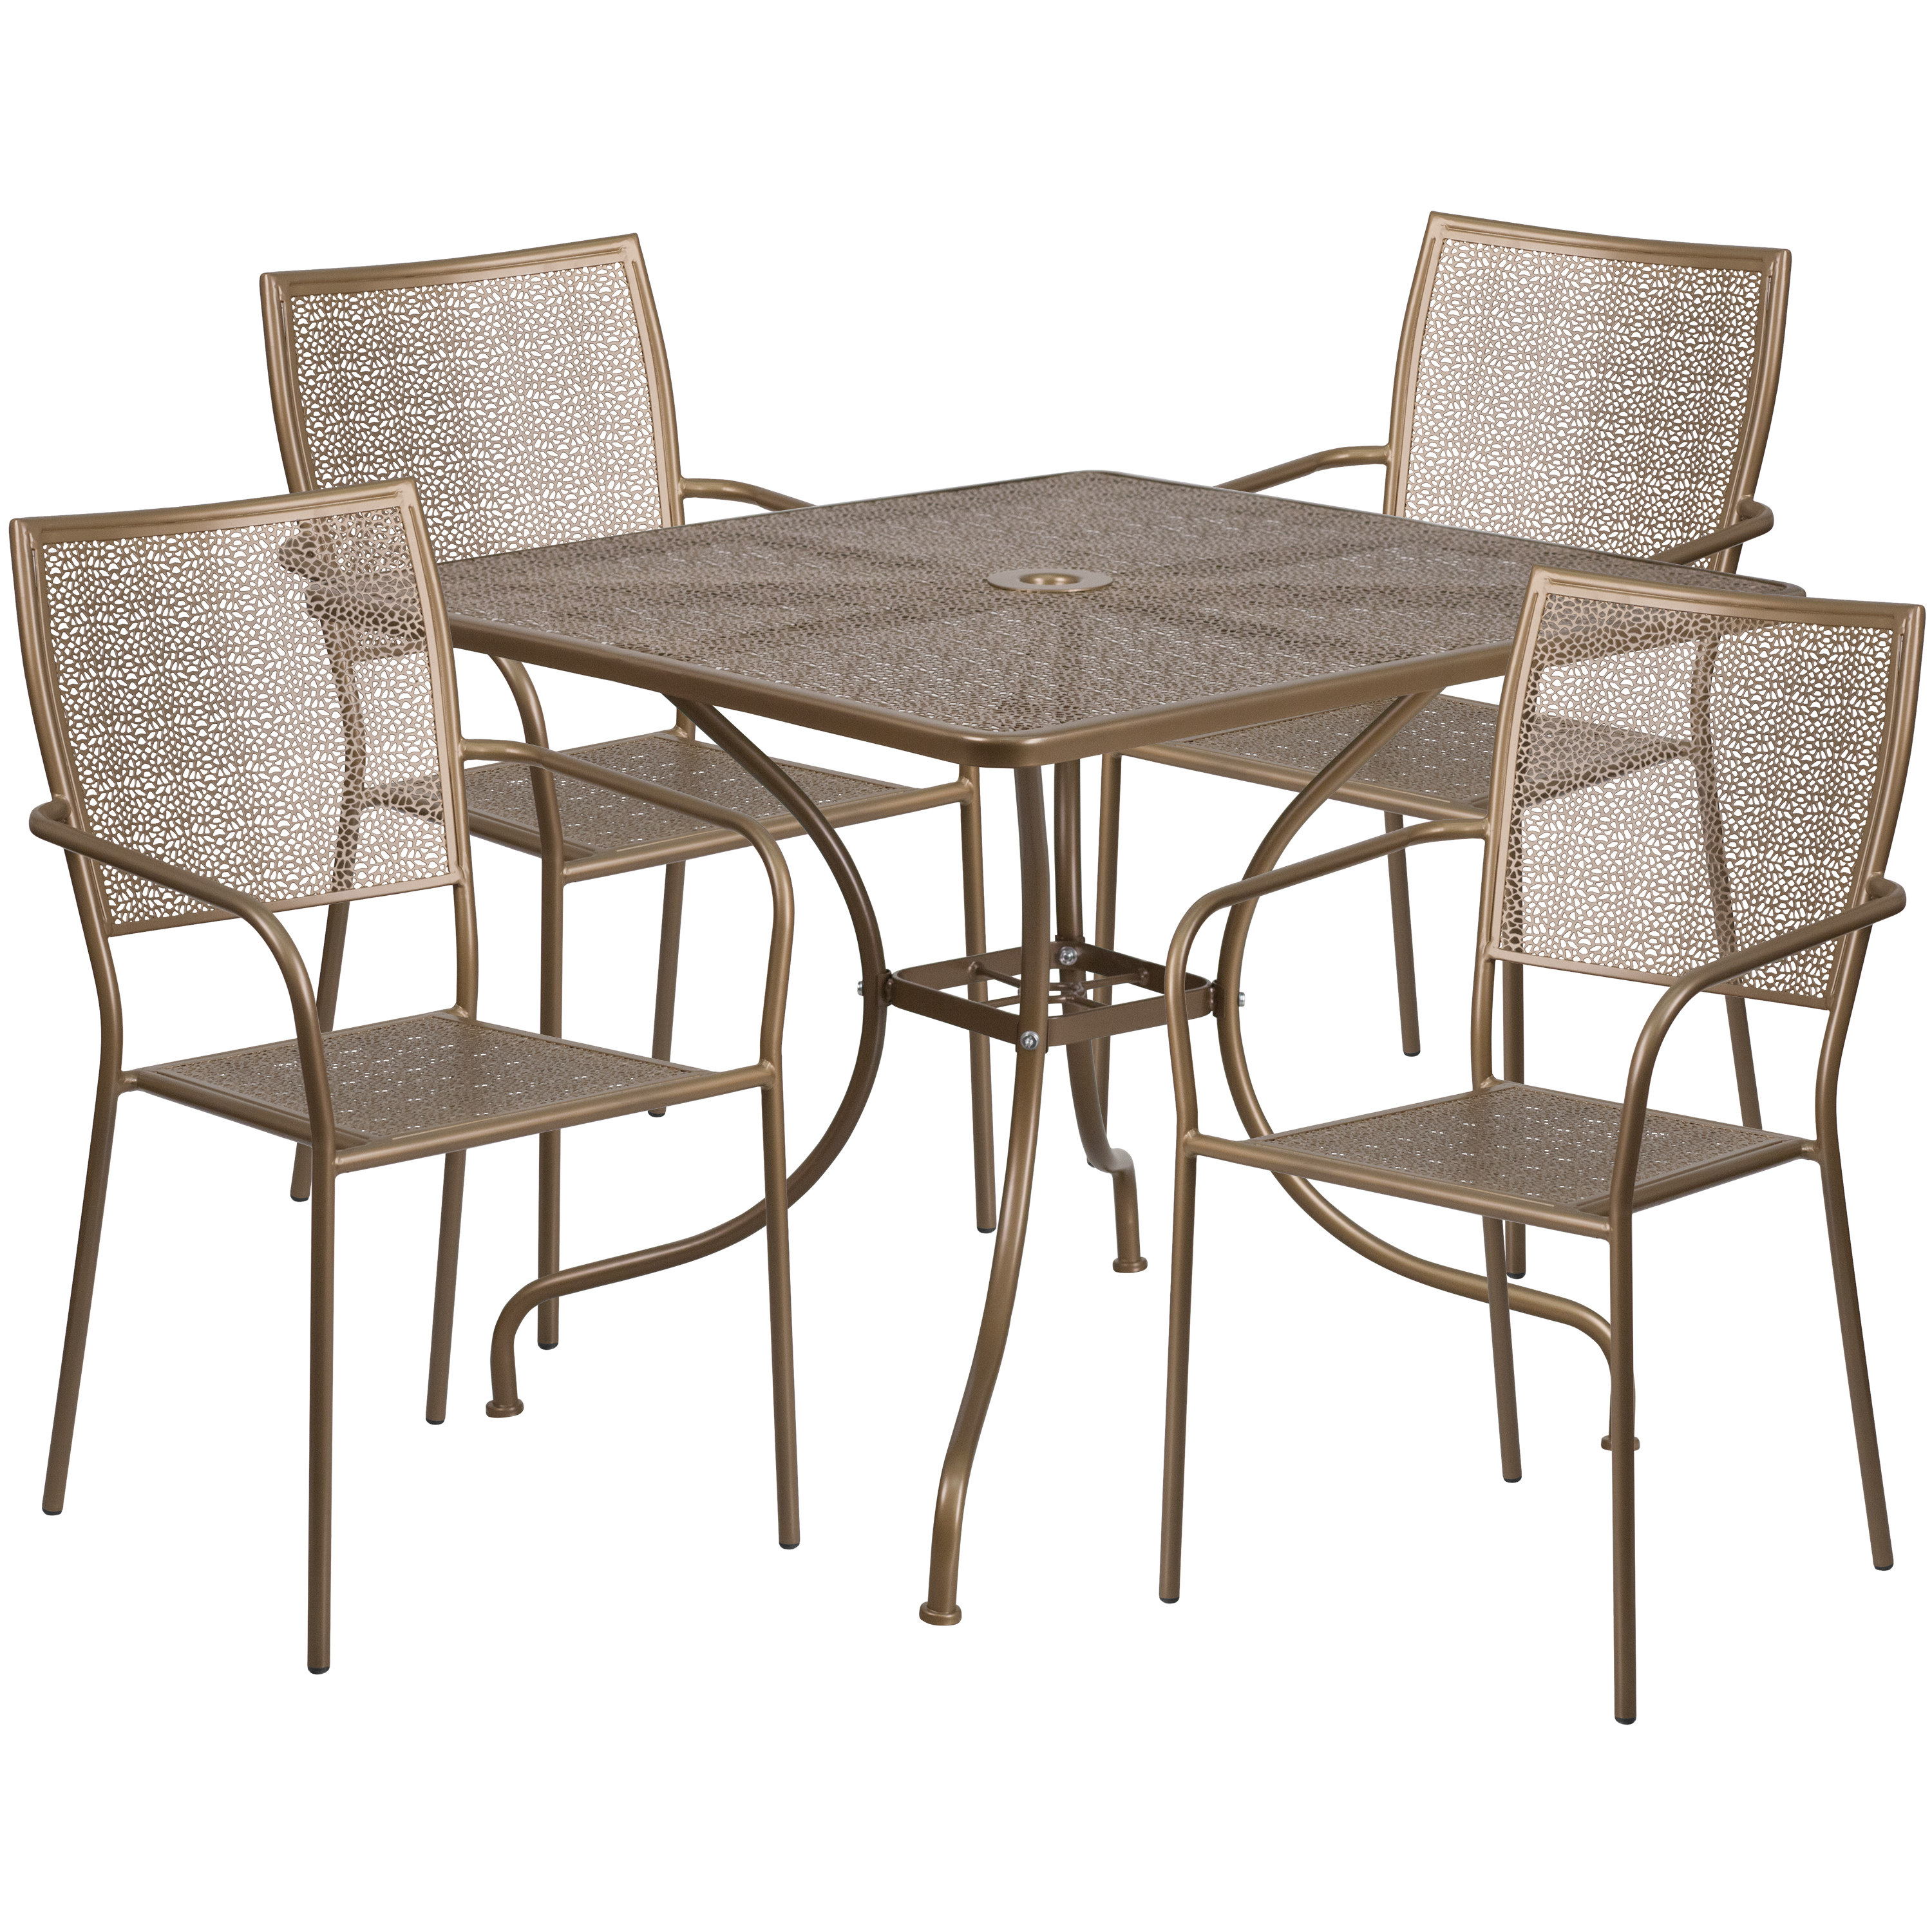 Flash Furniture Commercial Grade 35.5" Square Gold Indoor-Outdoor Steel Patio Table Set with 4 Square Back Chairs - image 2 of 5